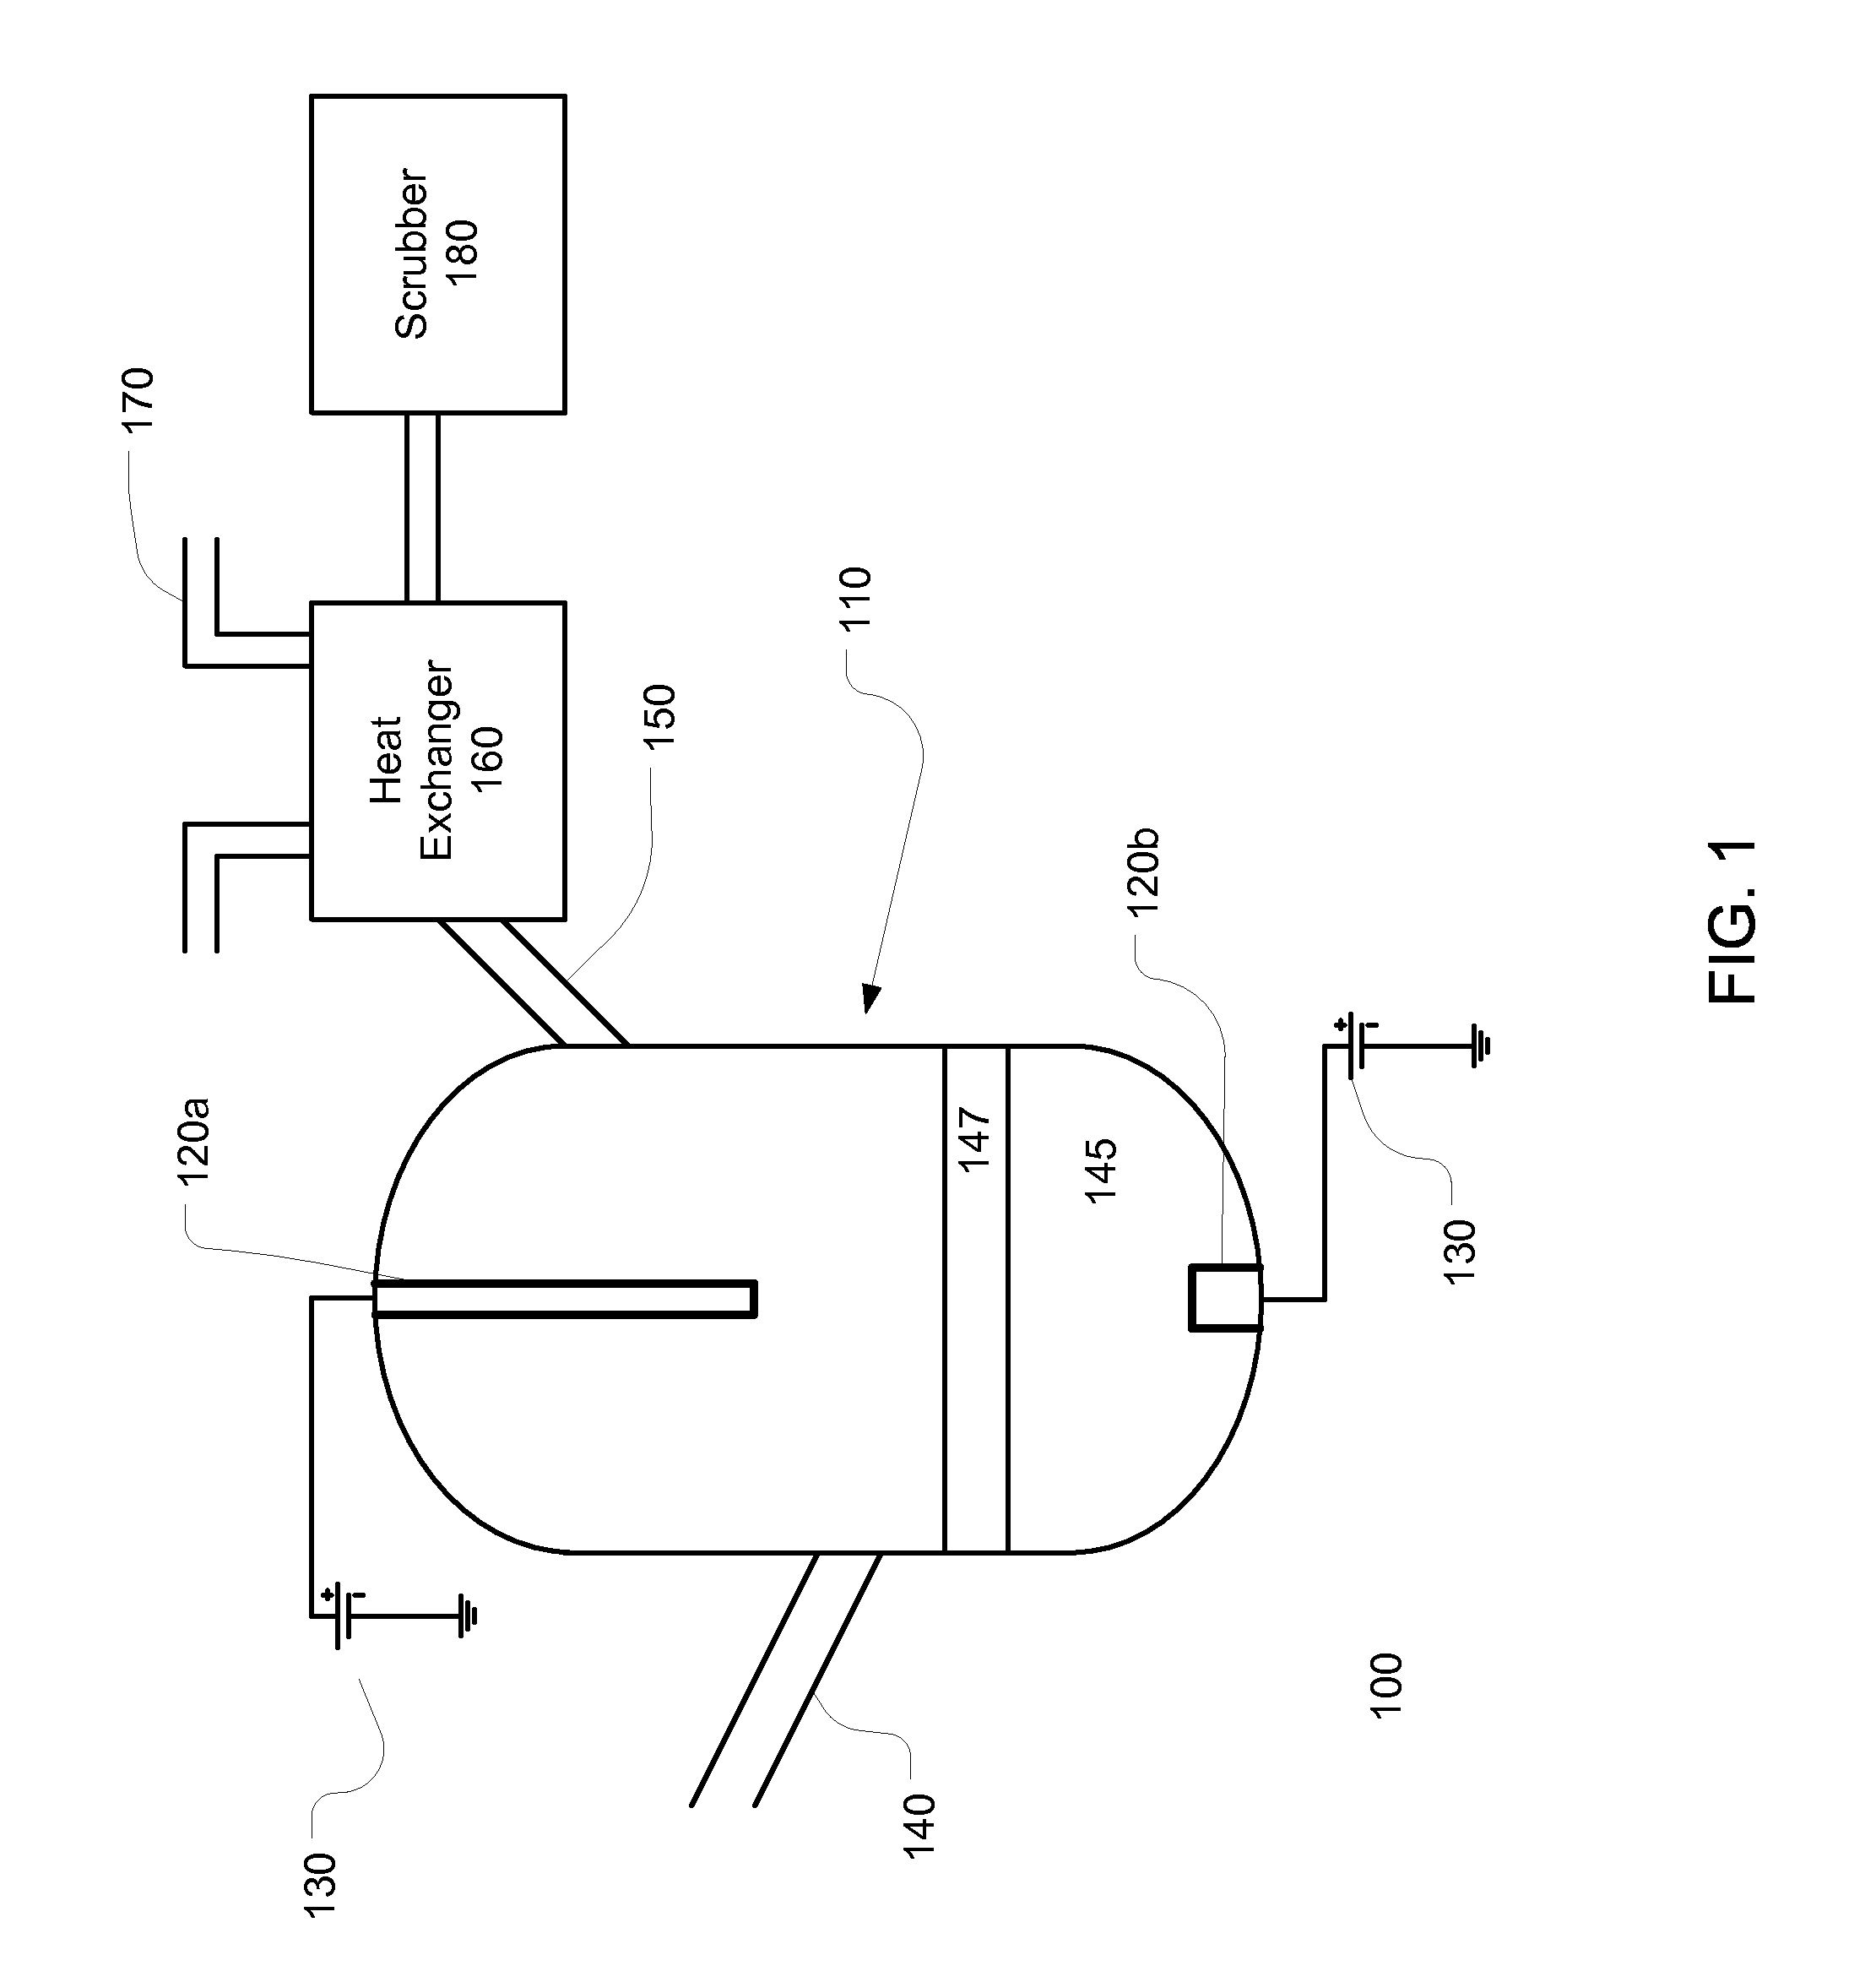 Regenerator for syngas cleanup and energy recovery in gasifier systems